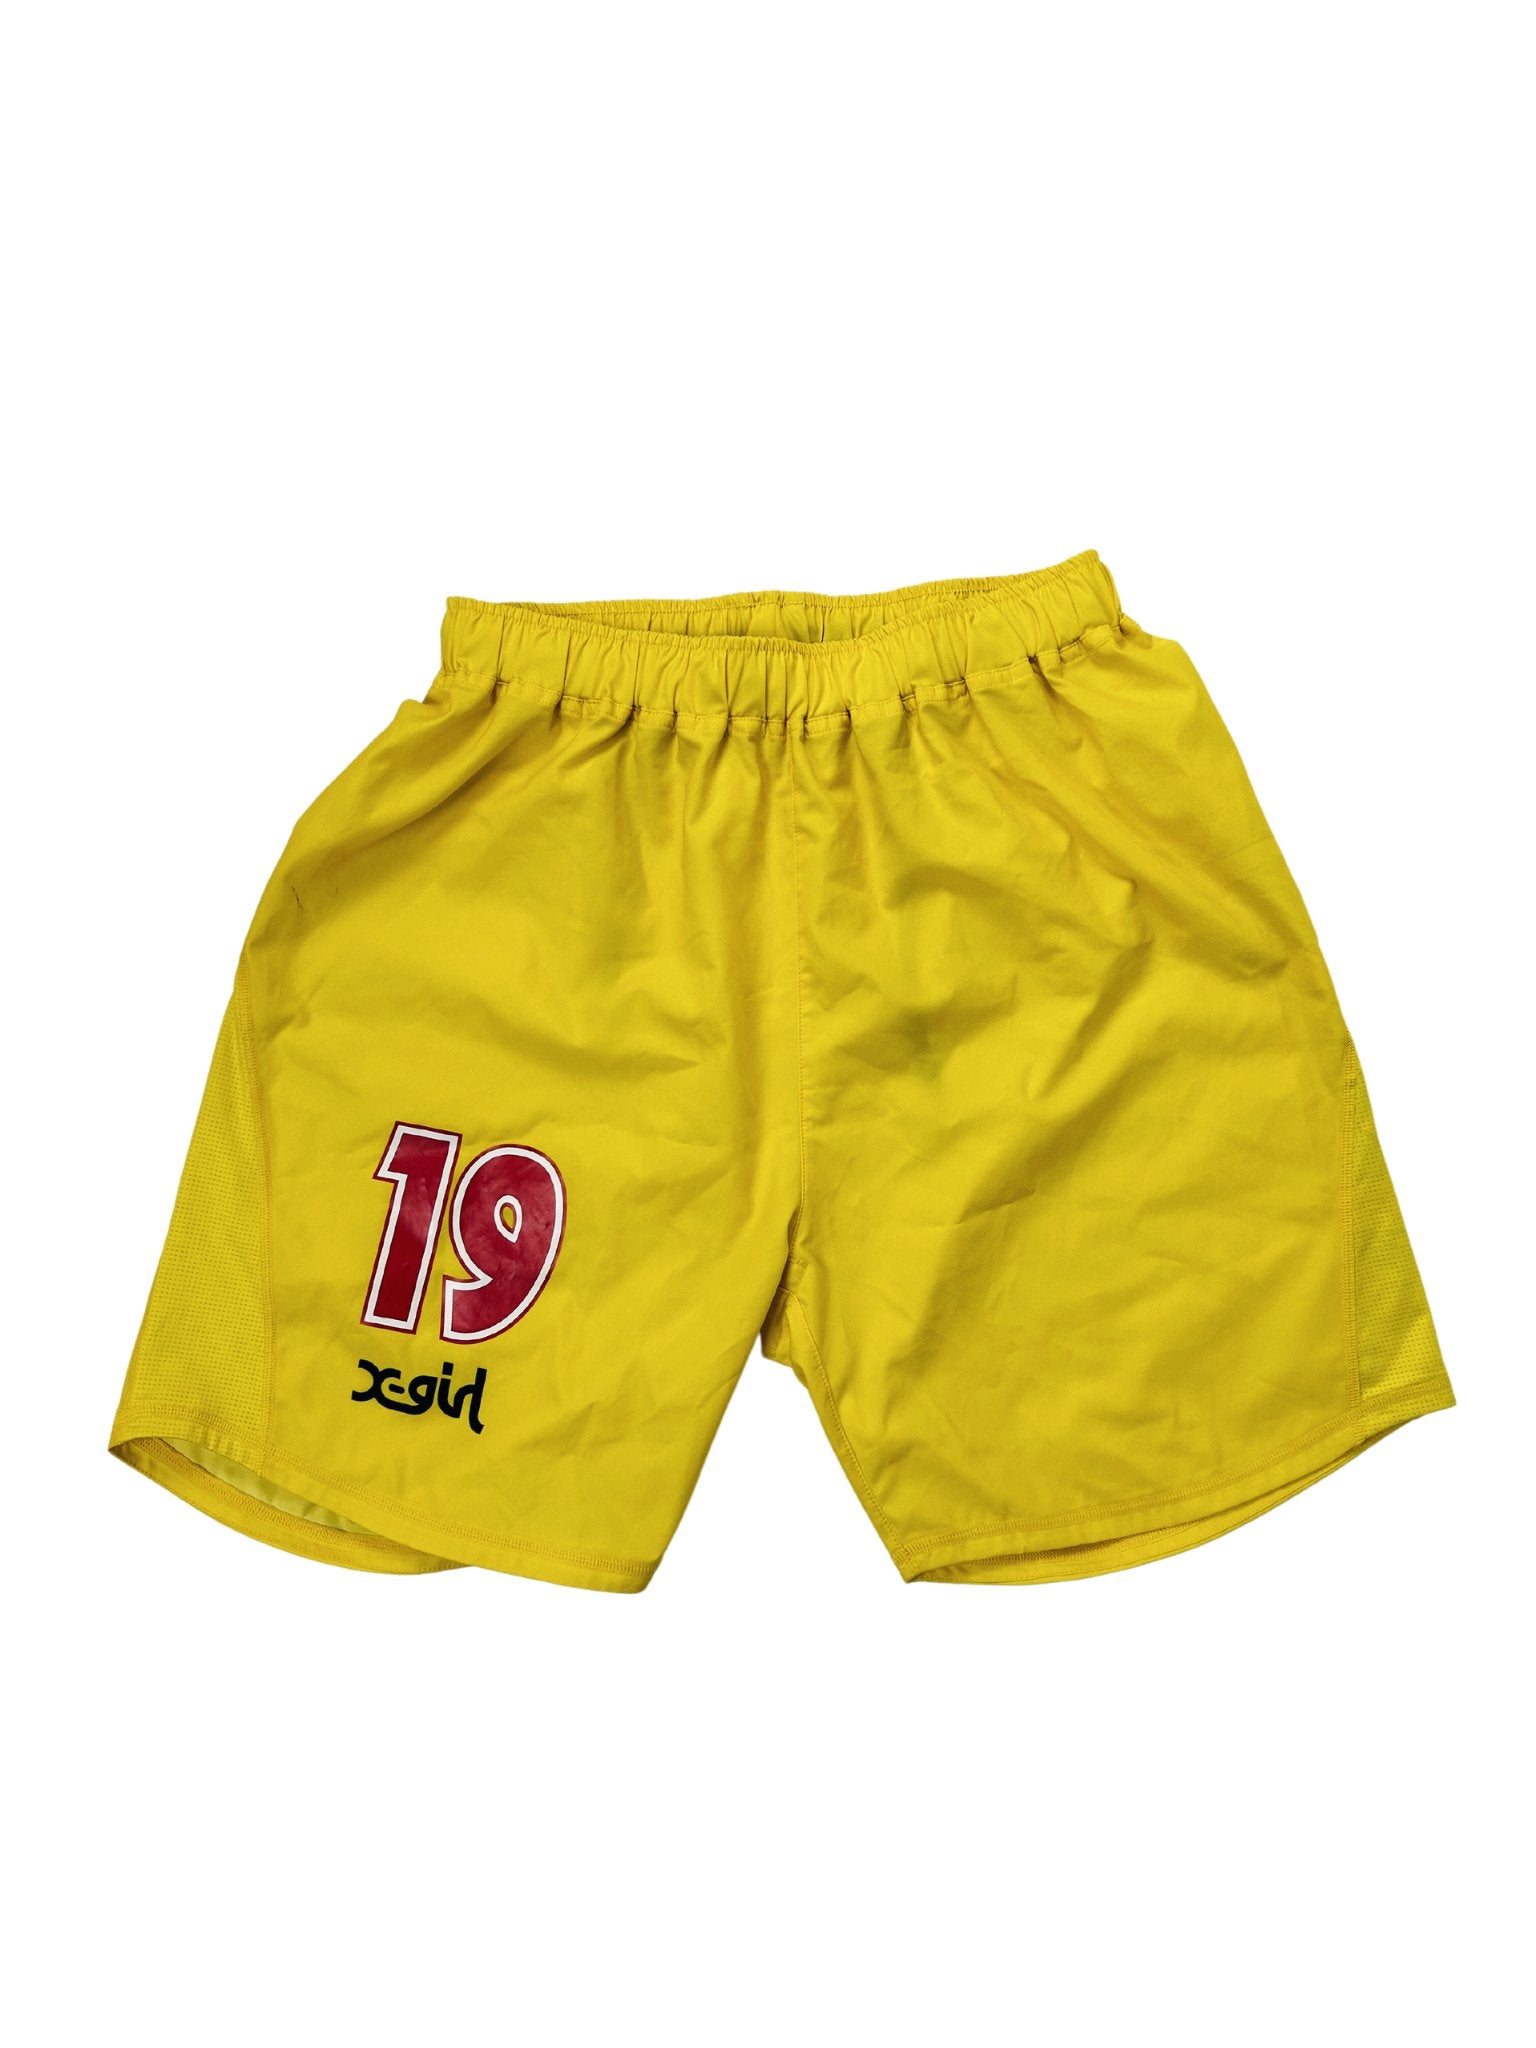 JEF United Home Shorts Women's L-Unwanted FC-stride